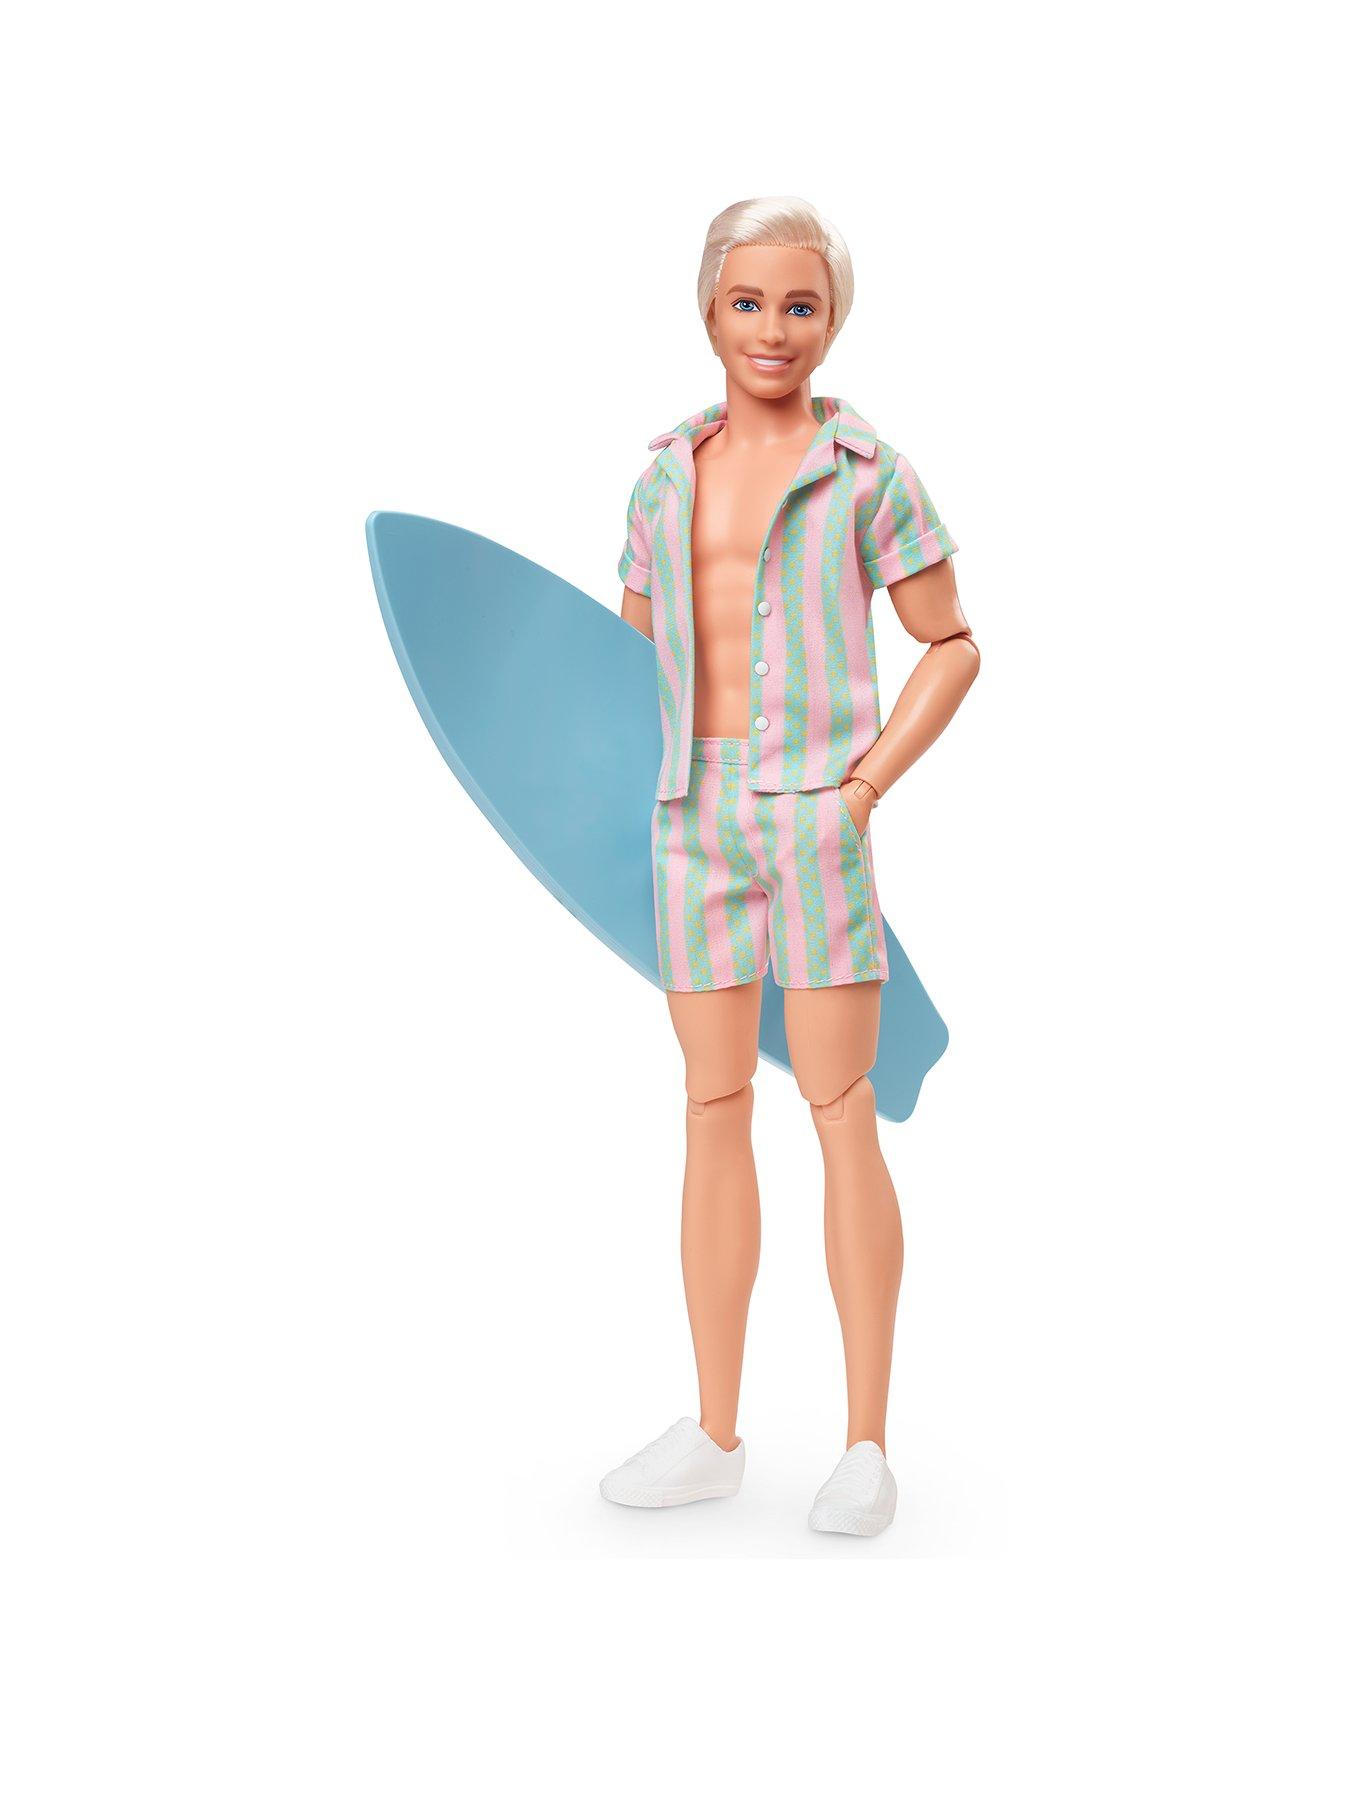 Beach　Doll　in　Outfit　Pastel　Ken　Barbie　Movie:　The　Stripes